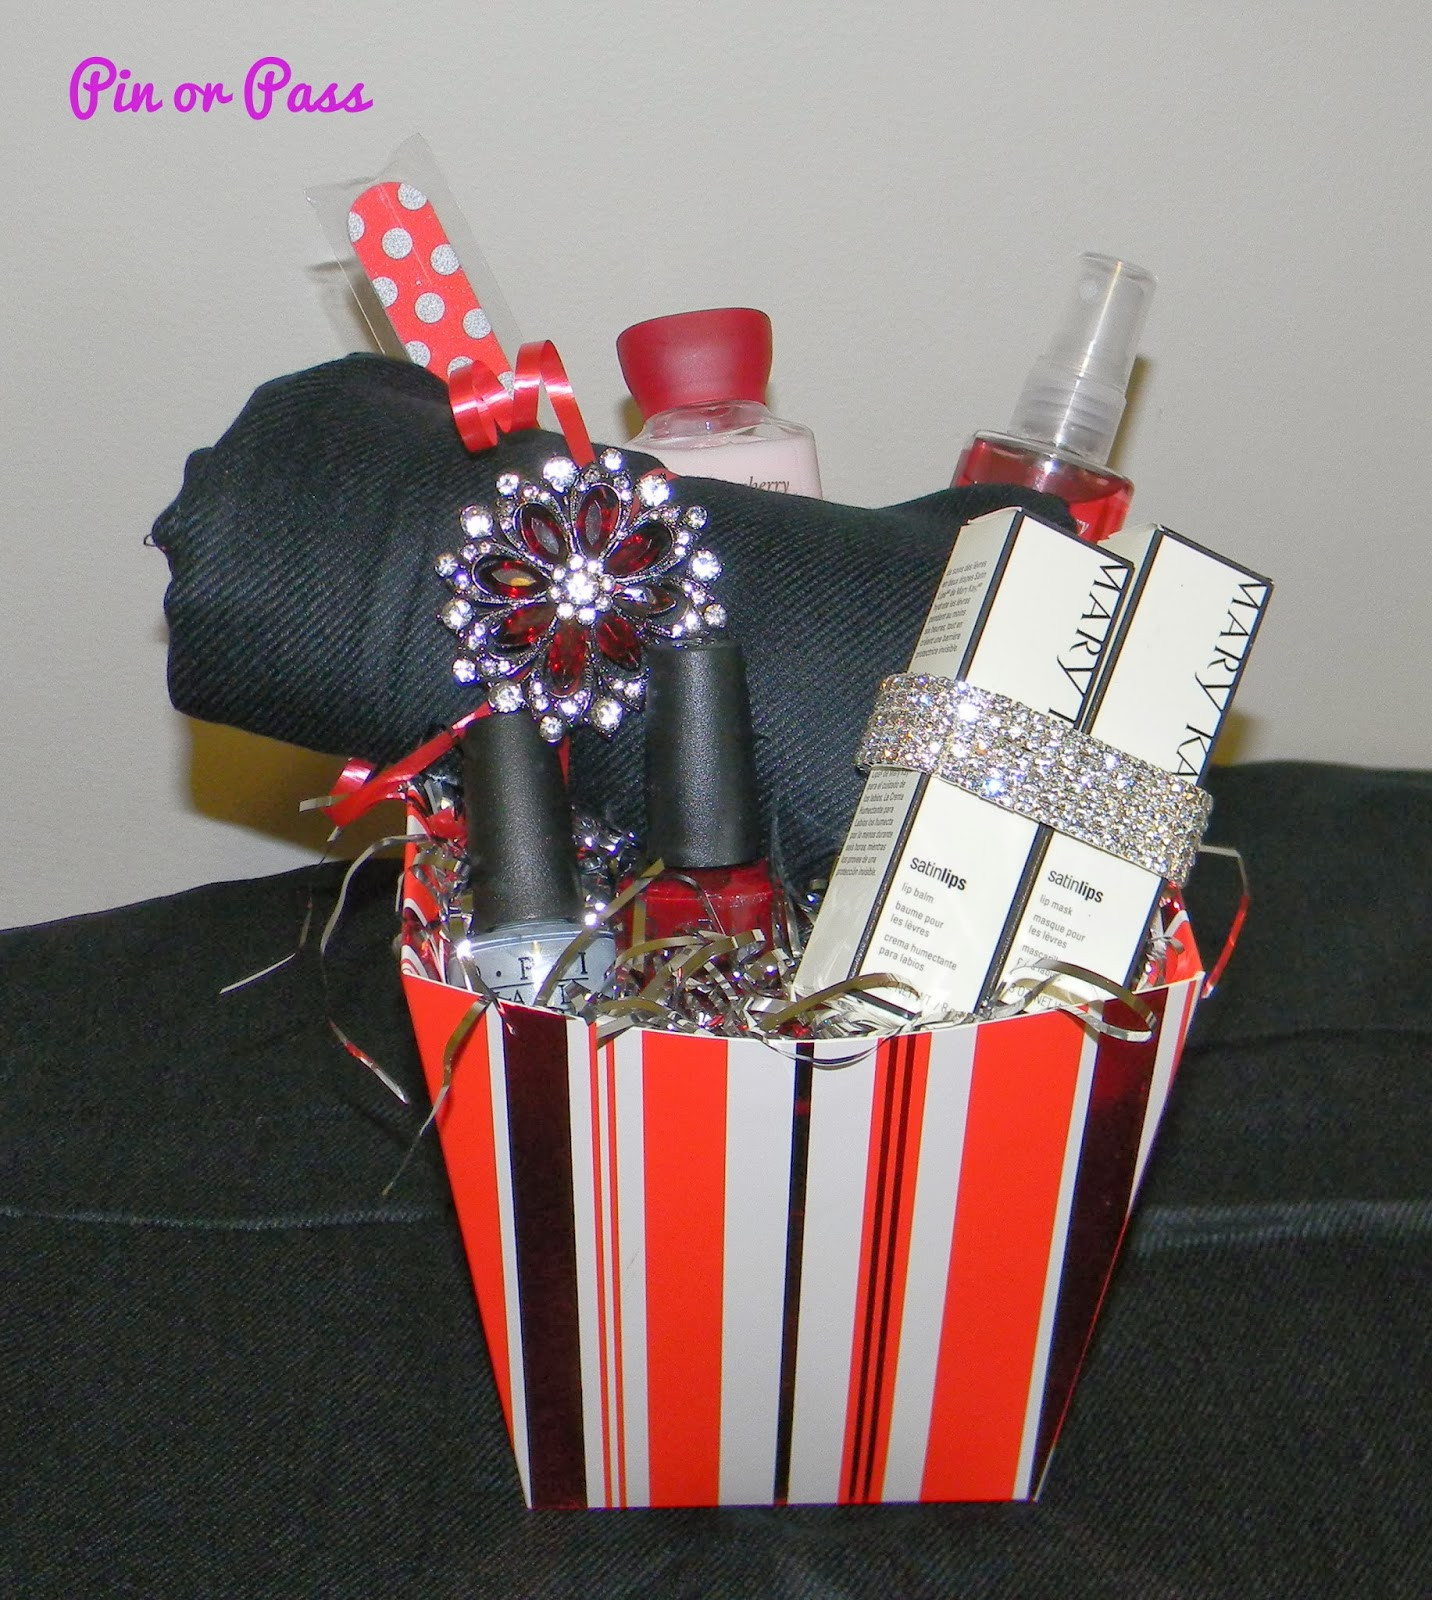 Holiday Party Raffle Ideas
 Pin or Pass A Holiday Gift Basket Idea Inspired by Pinterest